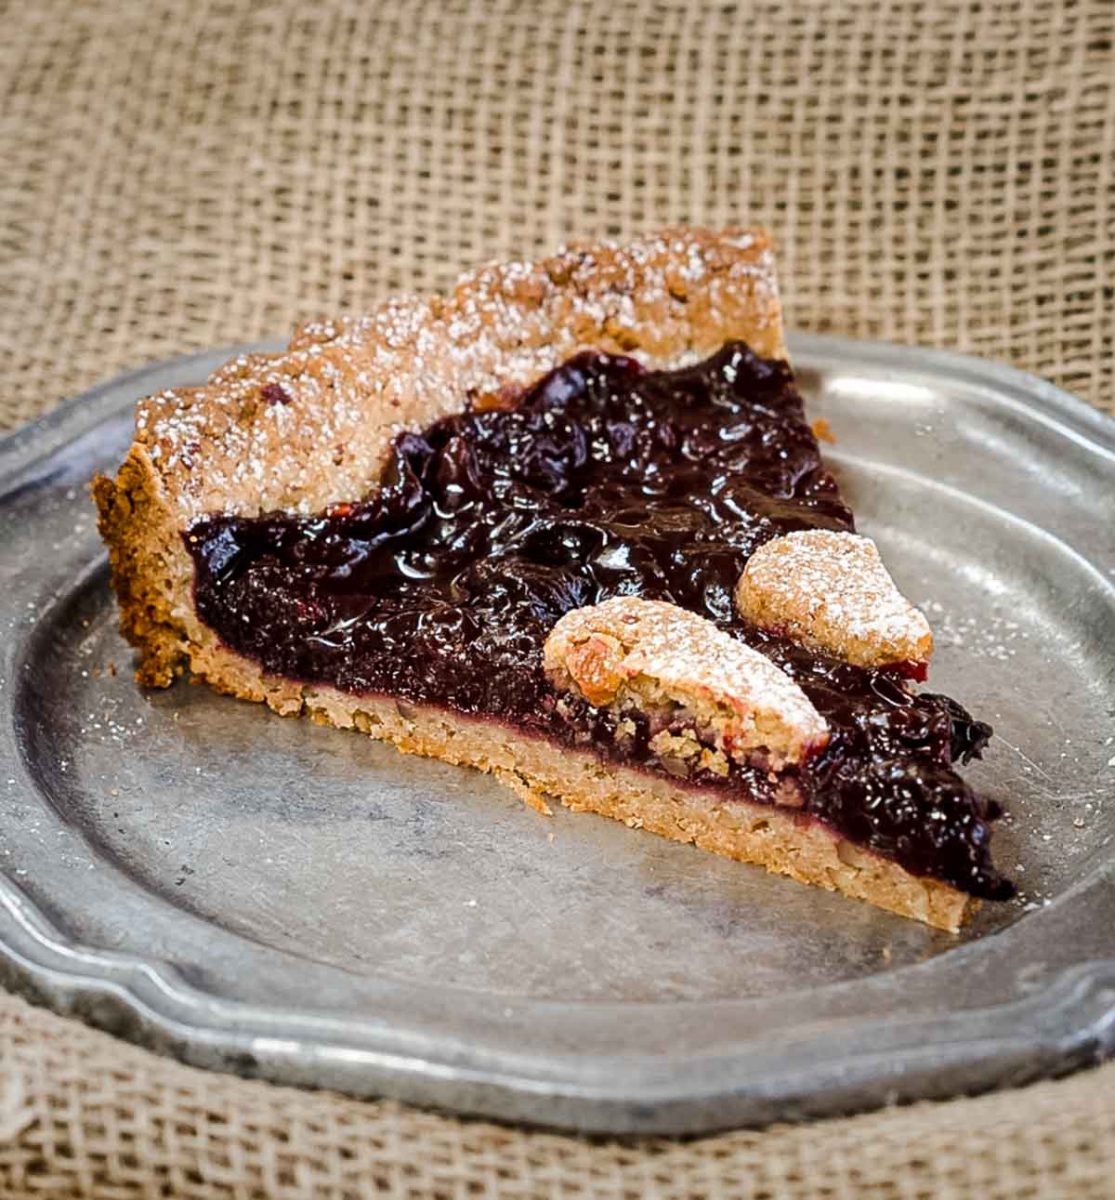 A slice of cherry torte dessert on a metal plate showing a thick dark cherry filling on a golden brown pecan crust. Hostess At Heart